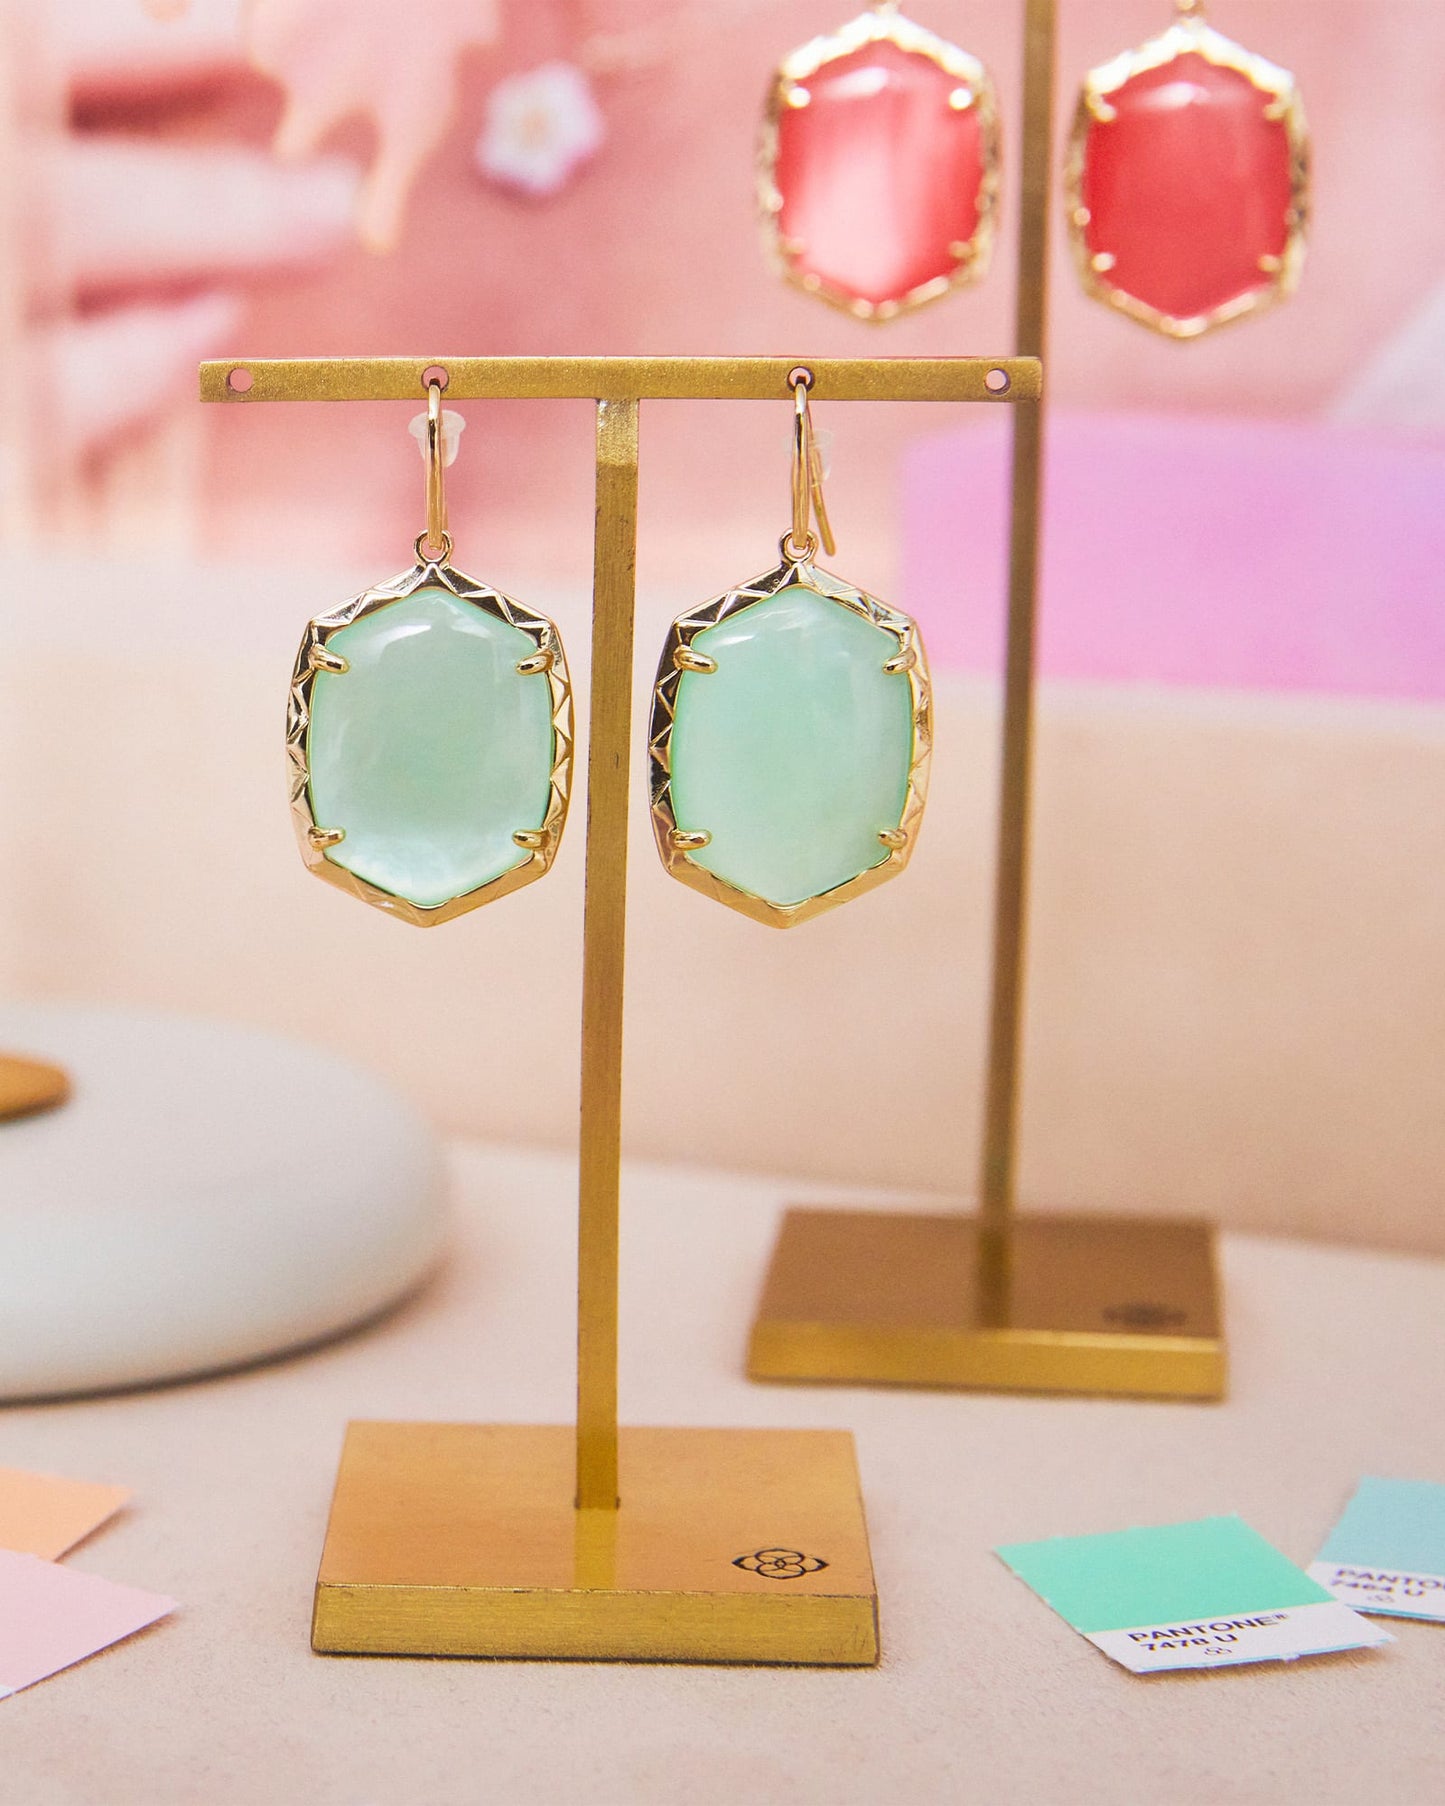 Daphne Gold Drop Earrings in Light Green Mother-of-Pearl